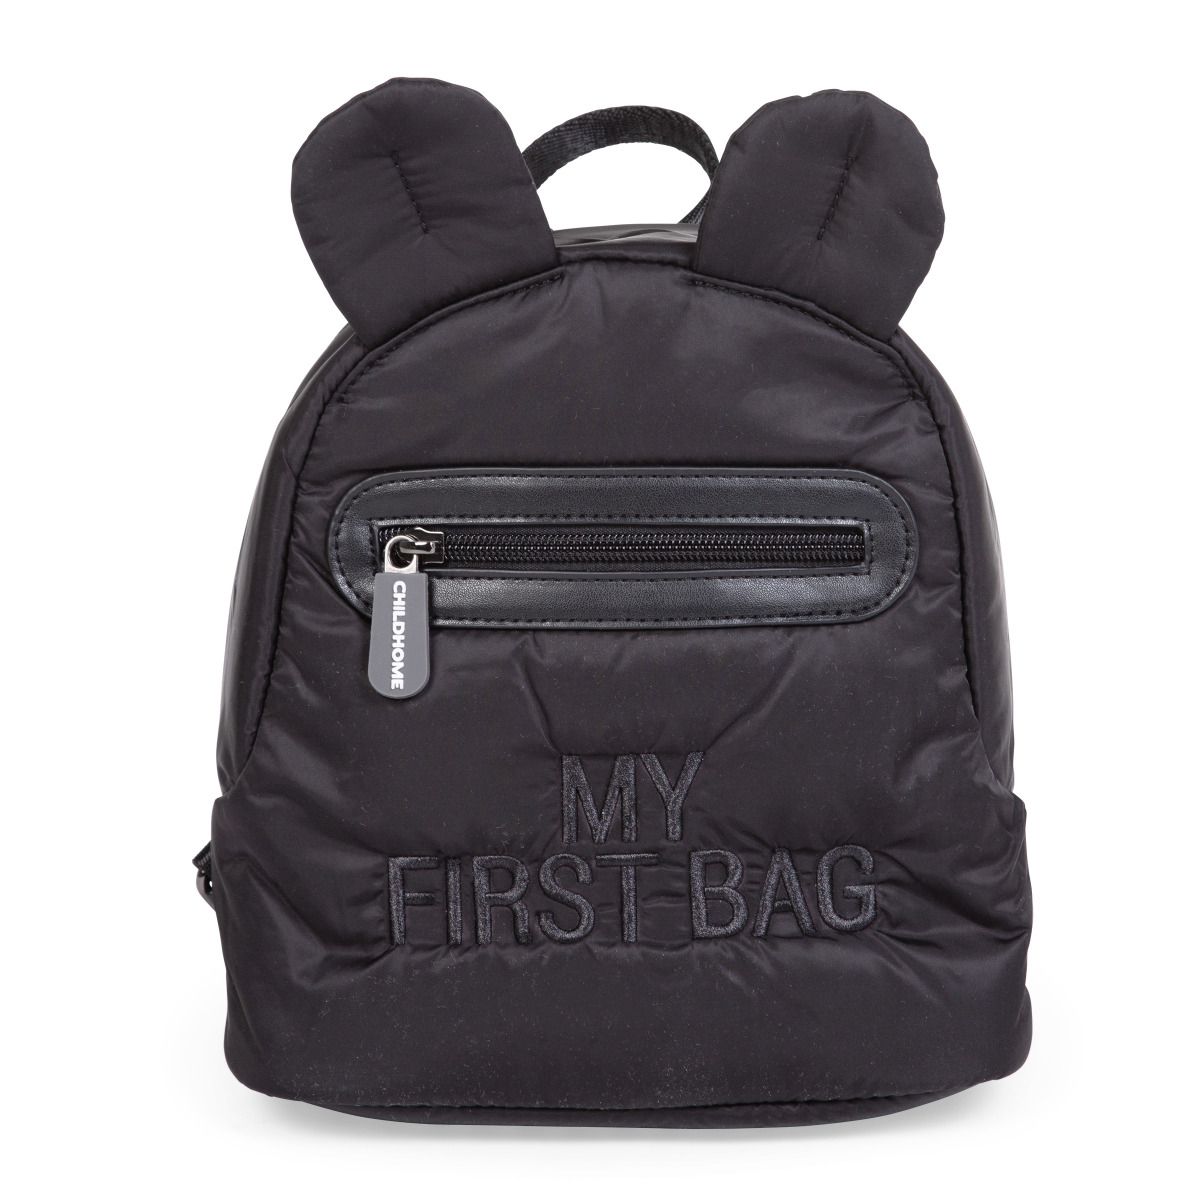 My first bag children's backpack - Puffered Black